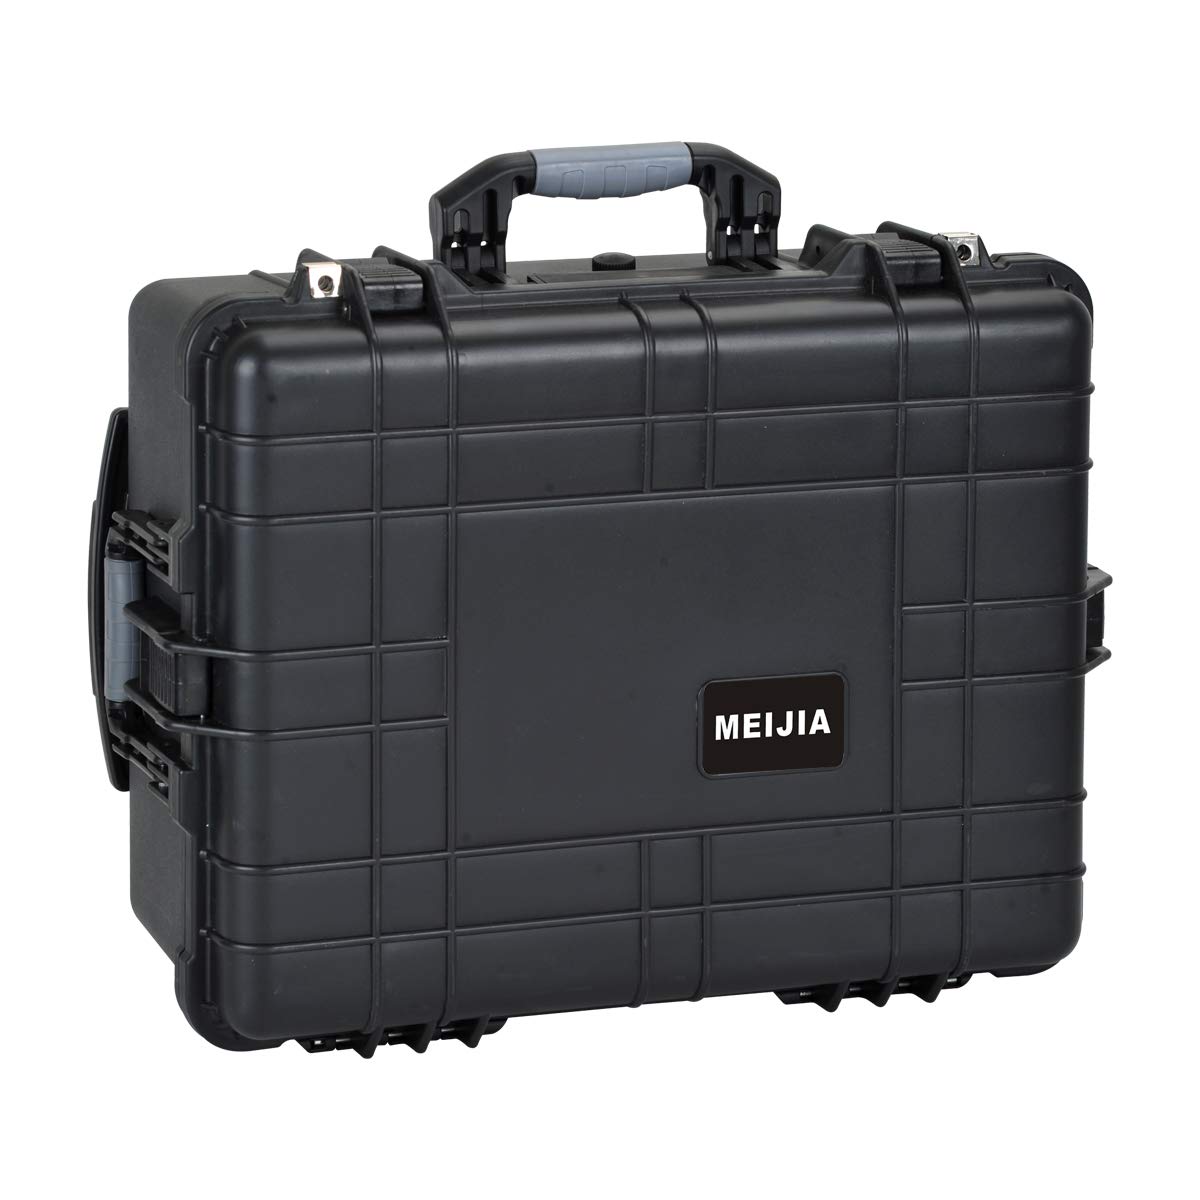 MEIJIA All Weather Waterproof Rolling Protective Case,Hard Compact Camera Case With Retractable Pull Handle And Wheels,Foam Inserted, Elegant Black, 24.64 X19.39 X13.78 inches